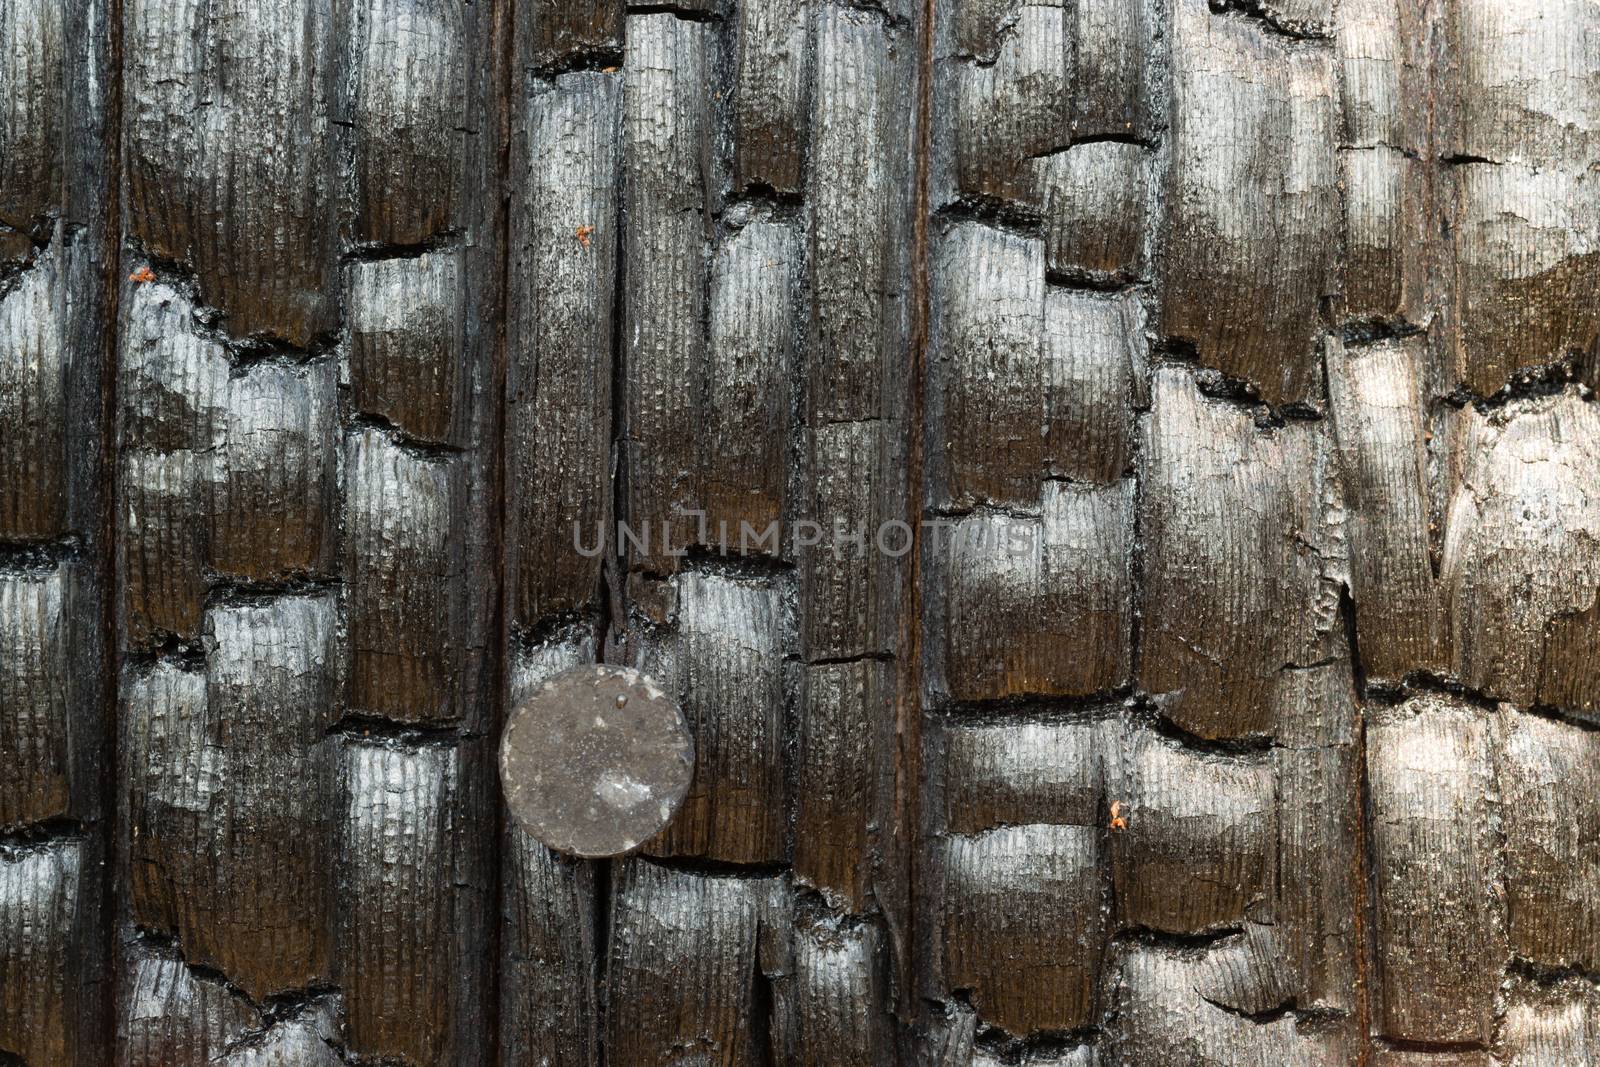 Burned Wood Fencepost Rusty Nail Charred Lumber by ChrisBoswell